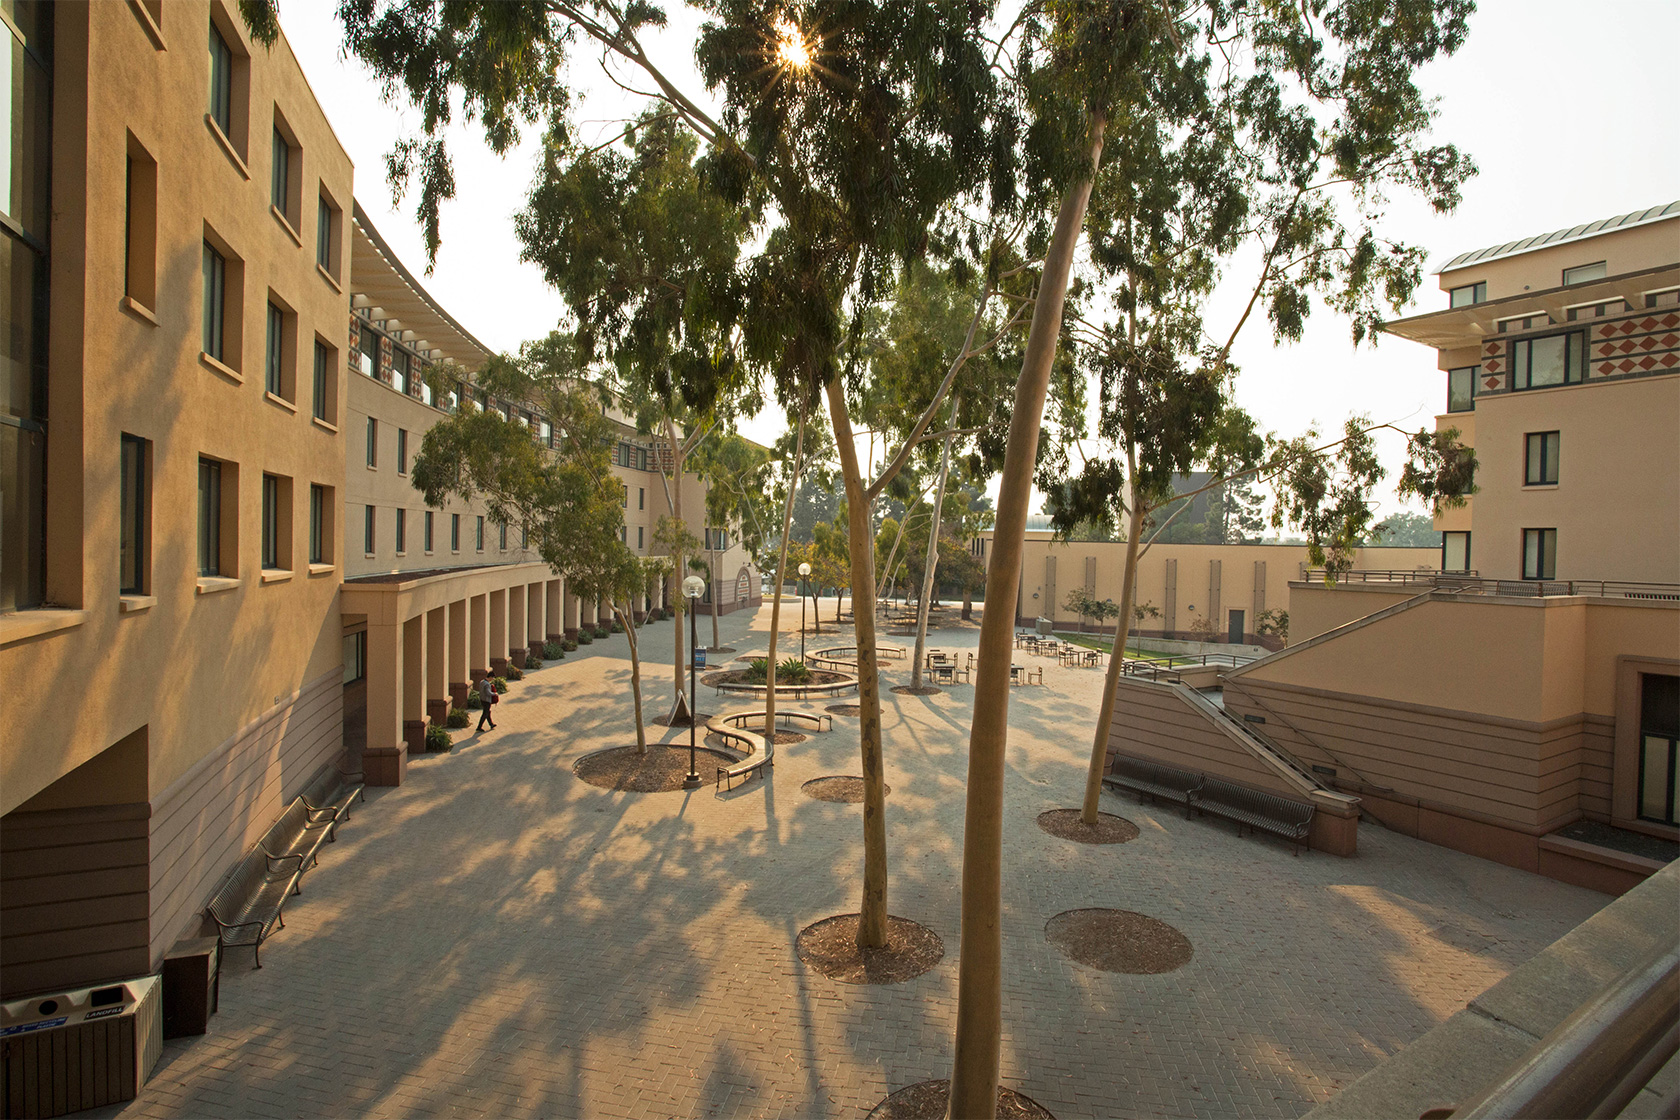 A view of the courtyard within the Humanities and Social Sciences Building, dominated with trees